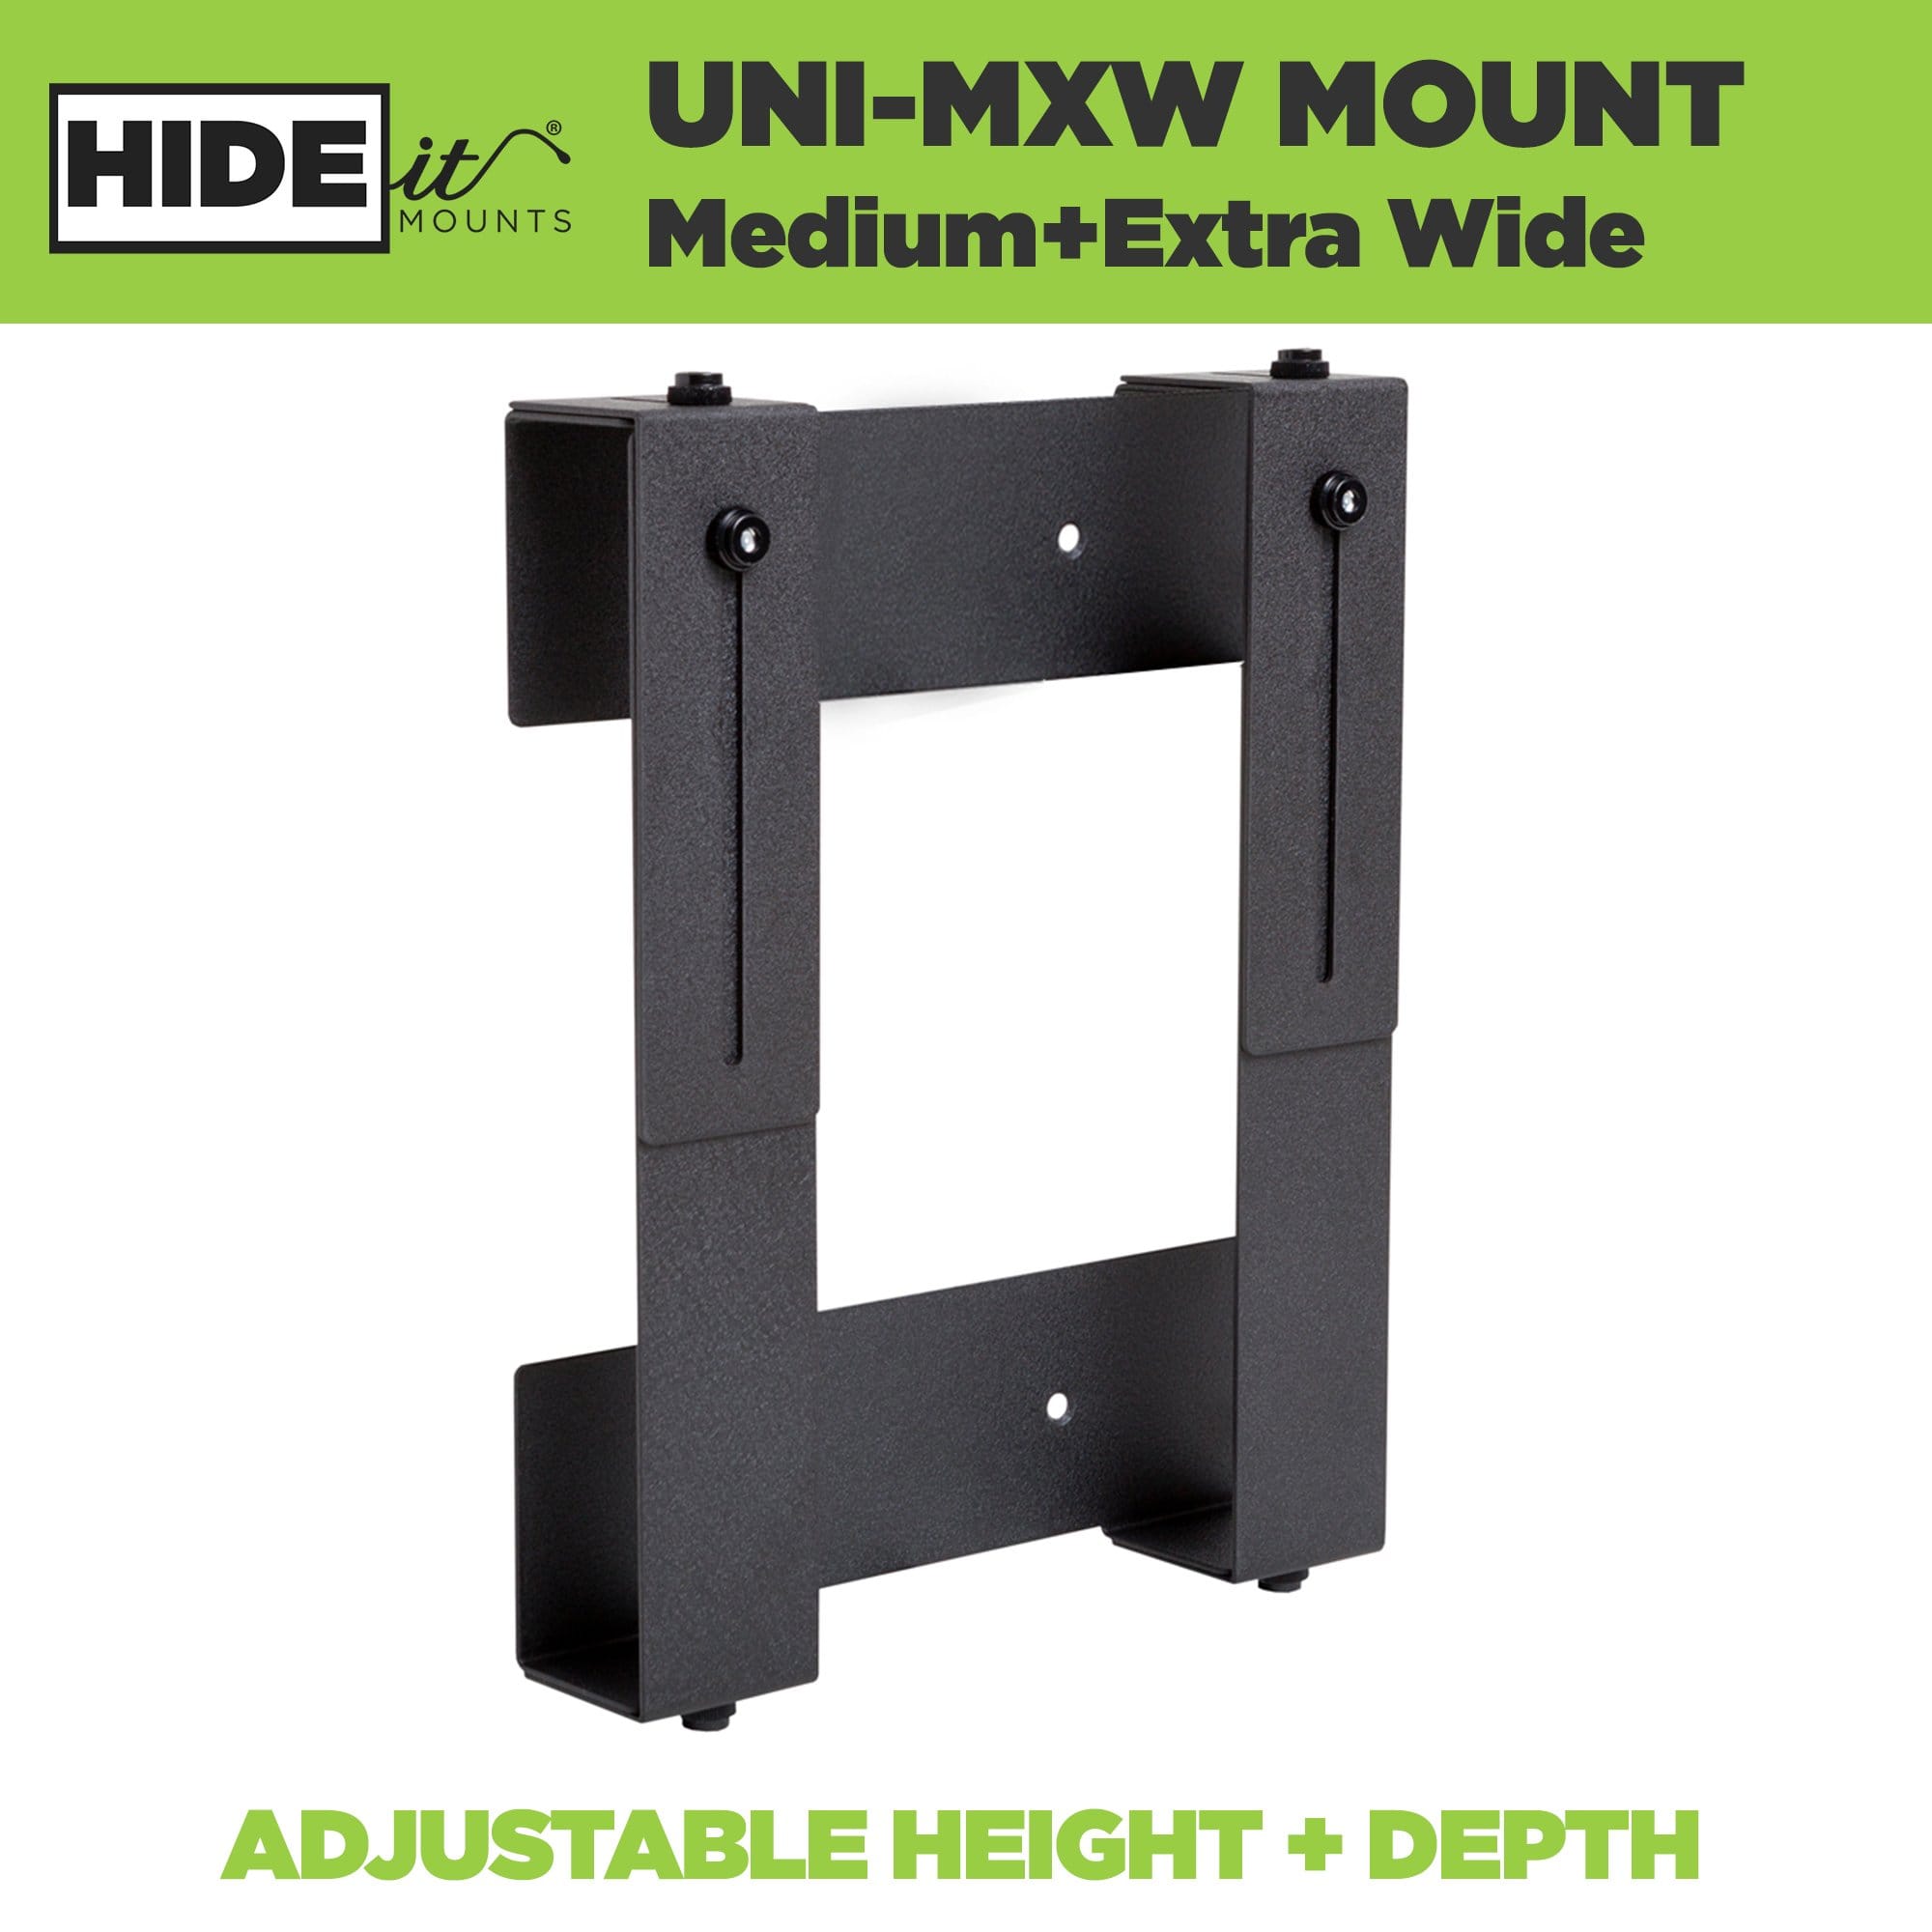 Steel adjustable wall mount for medium extra wide electronic devices, made by HIDEit Mounts.